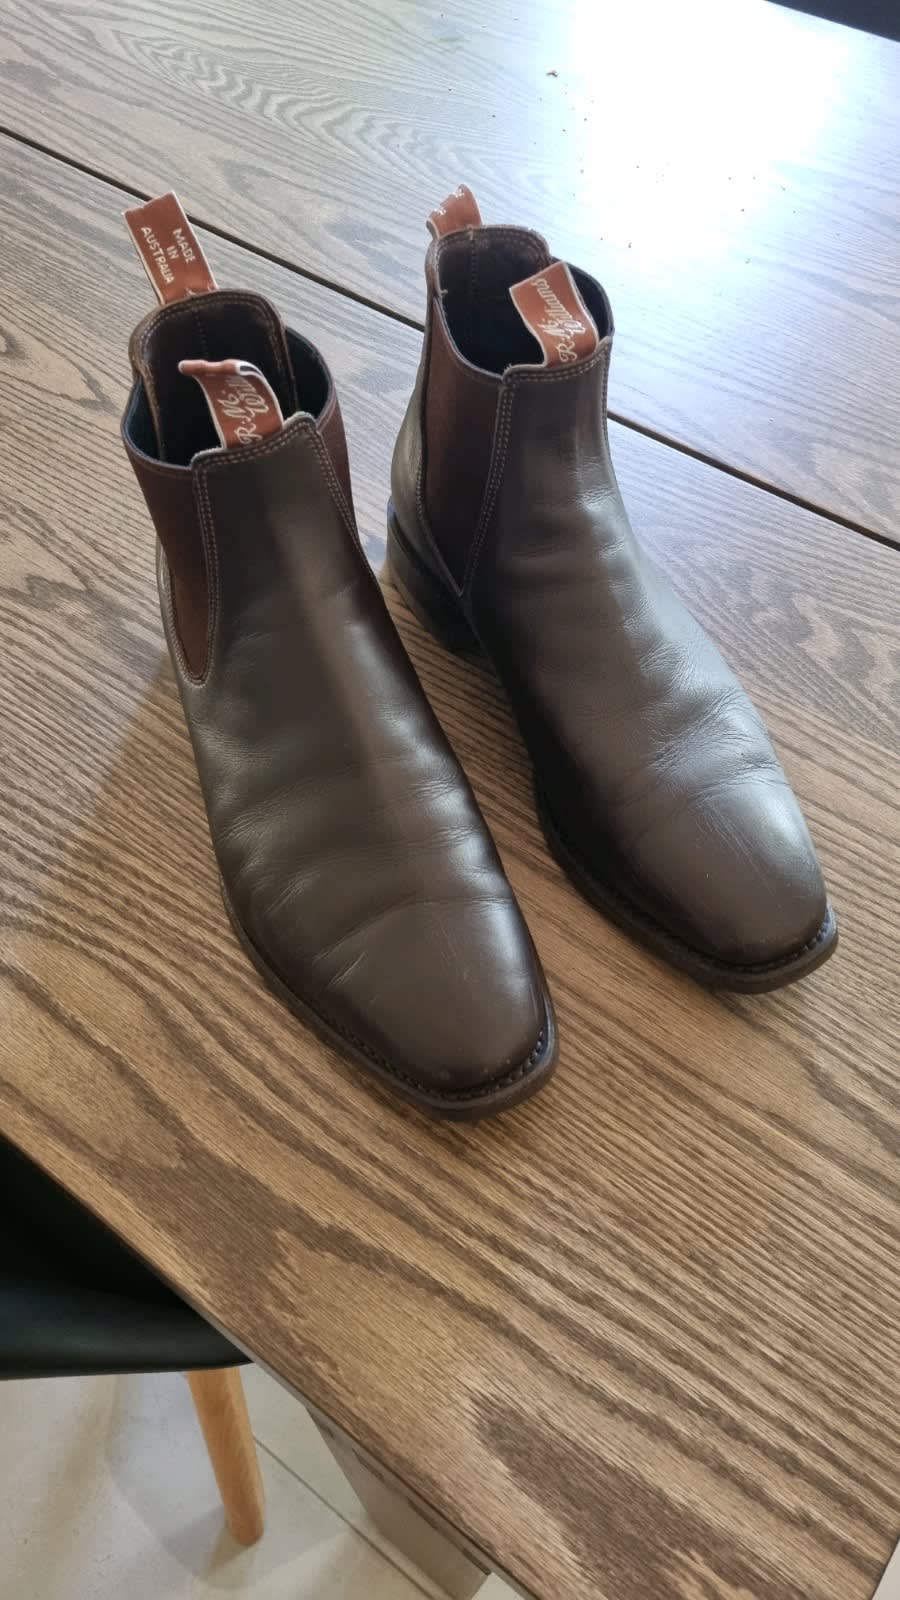 Sold at Auction: Pair of R.M. Williams boots, Craftsman Yearling Model in  chestnut leather, size 91/2 G, used but in fair condition, comes with  original box.